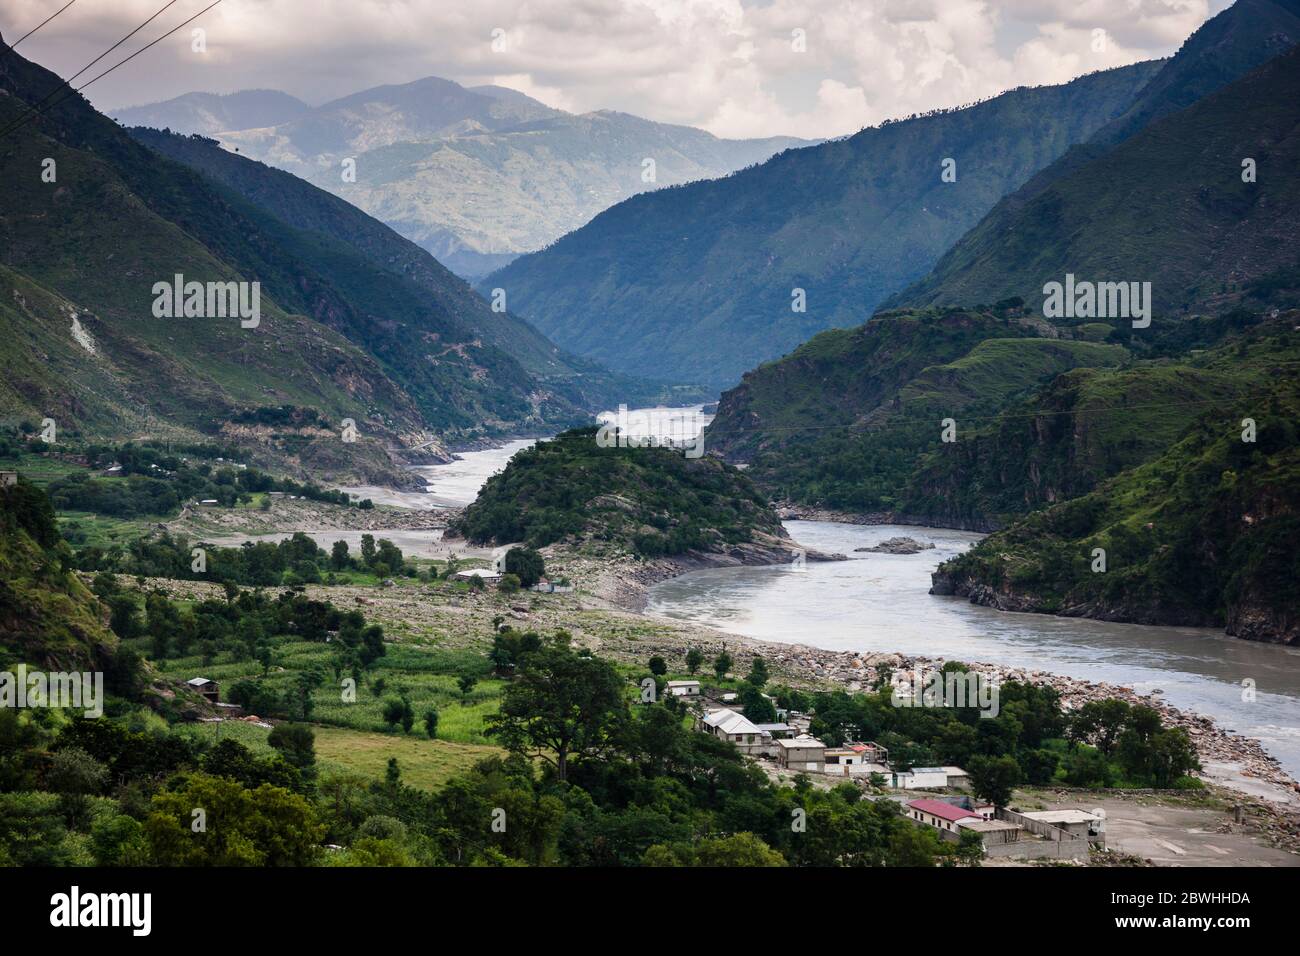 Indus valley from ancient battle field Pirsar(Aornos fortress) trekking,Bisham, Shangla, Khyber Pakhtunkhwa Province, Pakistan, South Asia, Asia Stock Photo